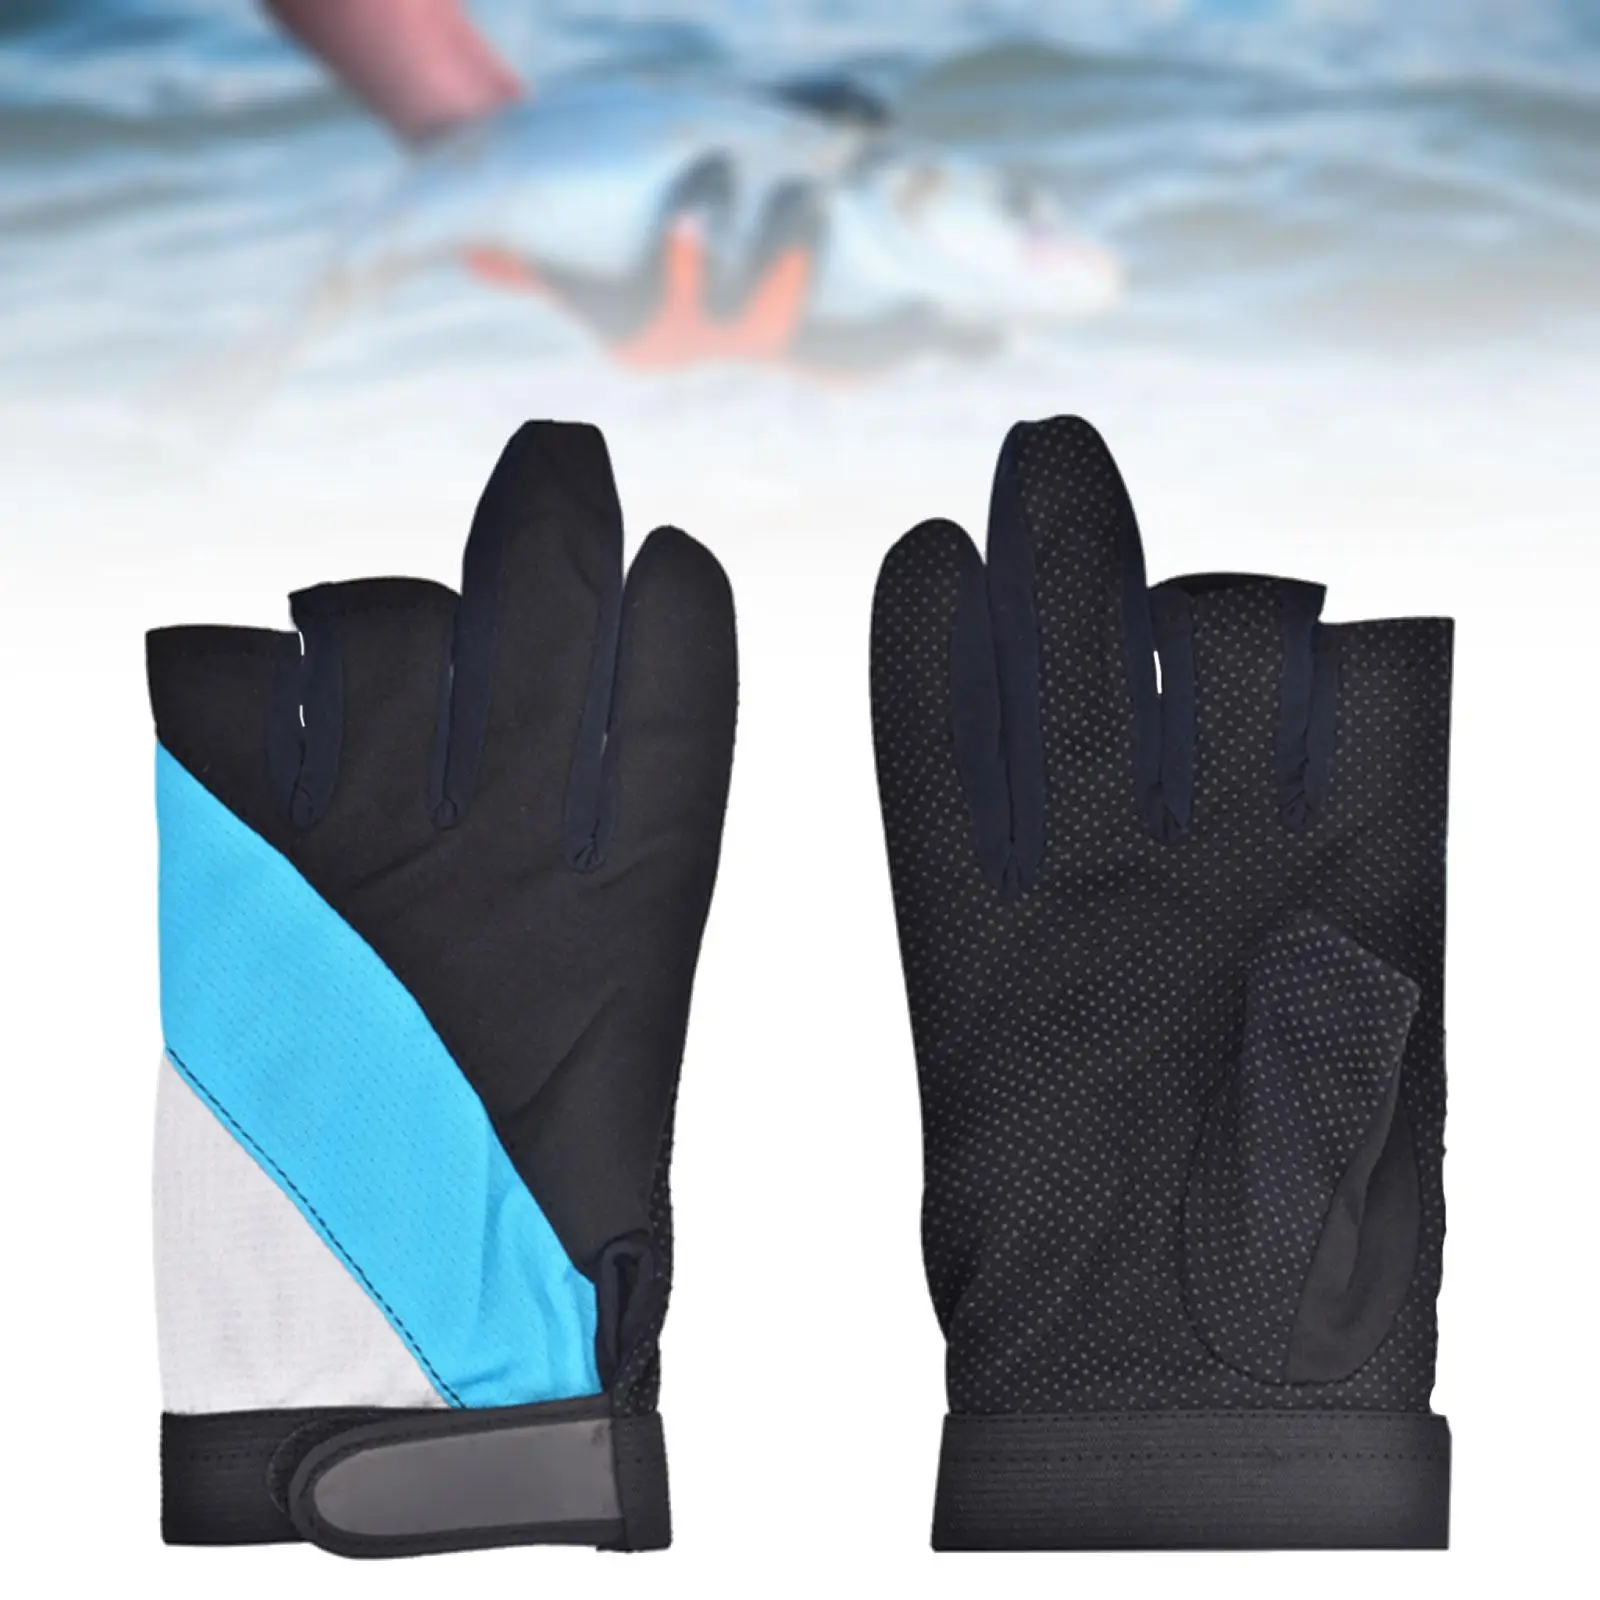 3 Cut Fingers Gloves Fishing Accessories Mittens for Kayaking Hiking Cycling